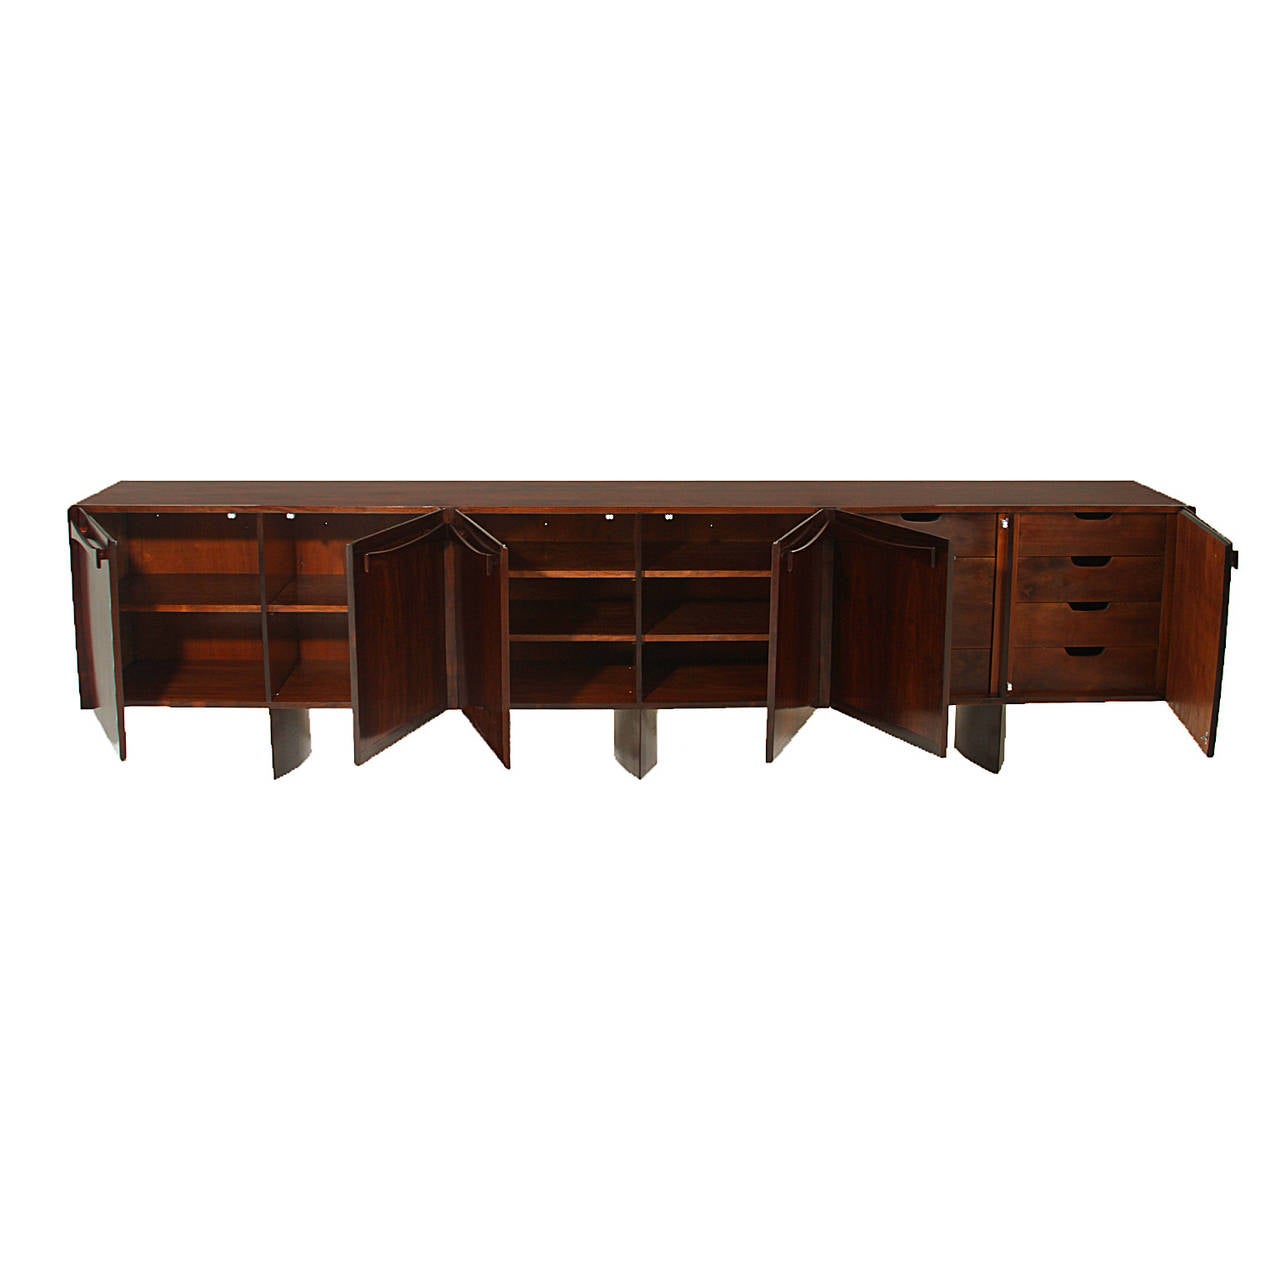 Brazilian Large Rosewood Credenza from Brazil with Bow Tie Pulls For Sale